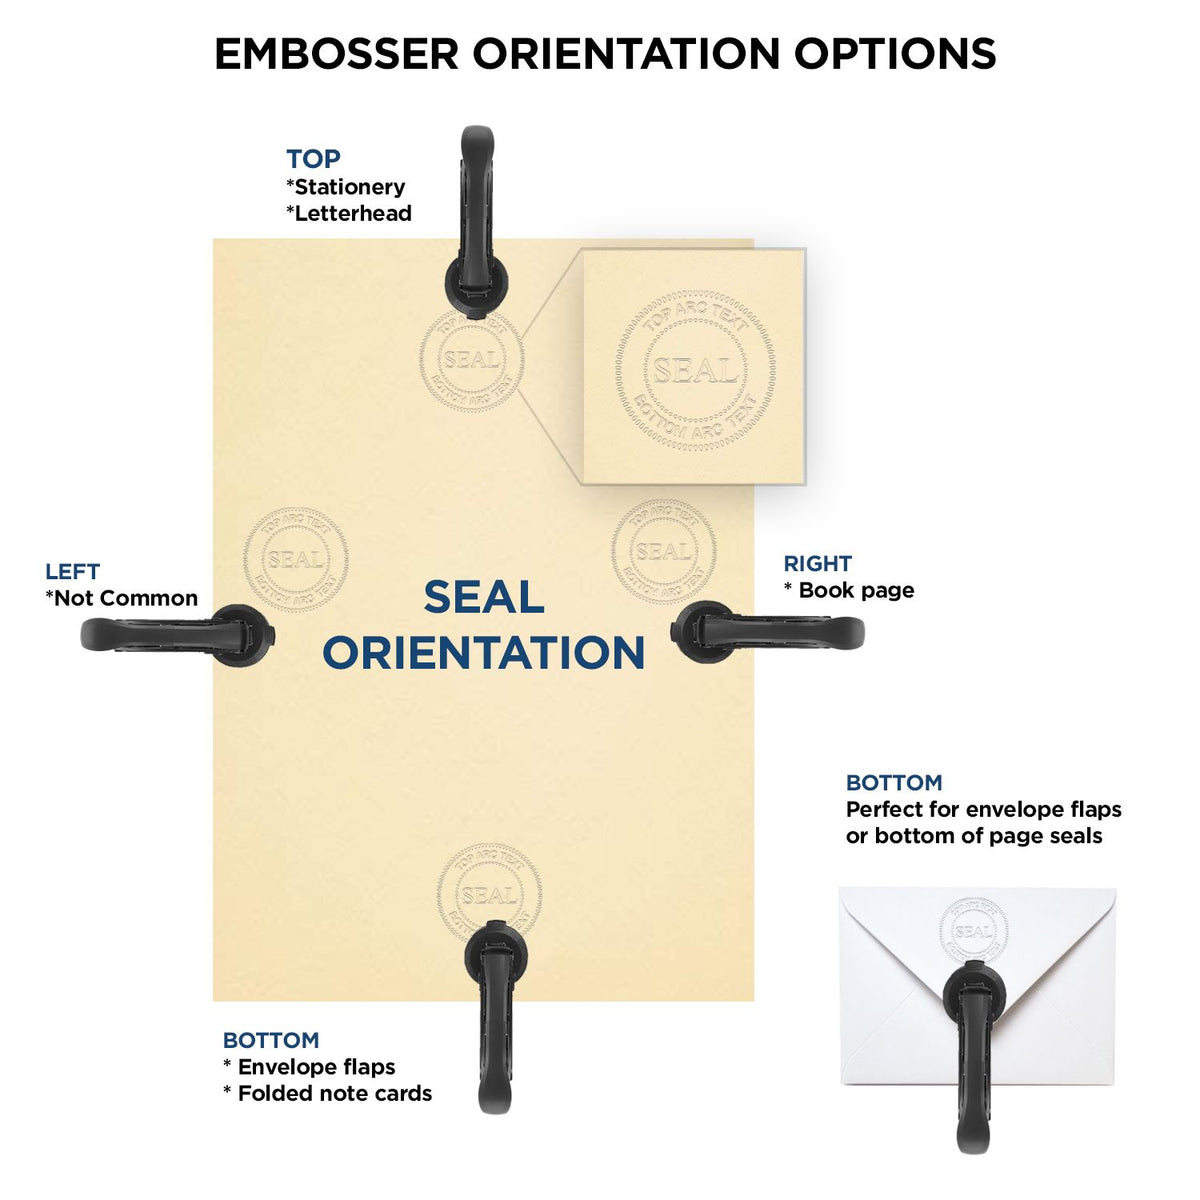 An infographic for the Heavy Duty Cast Iron New Mexico Engineer Seal Embosser showing embosser orientation, this is showing examples of a top, bottom, right and left insert.